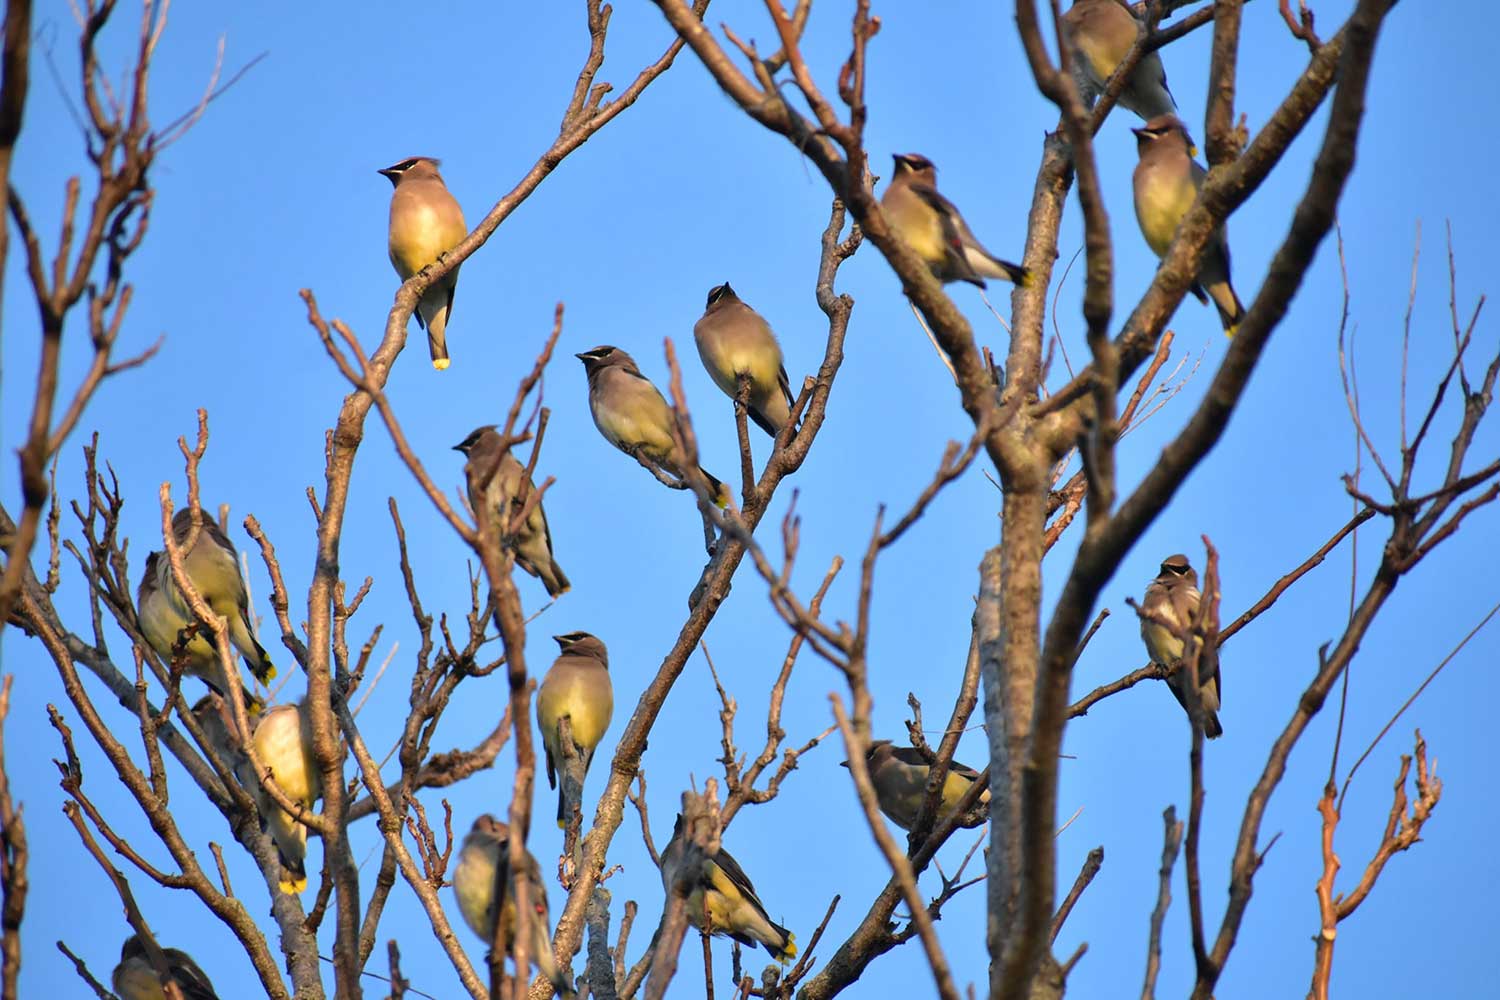 A flock of cedar waxwings at rest on the branches of a bare tree.